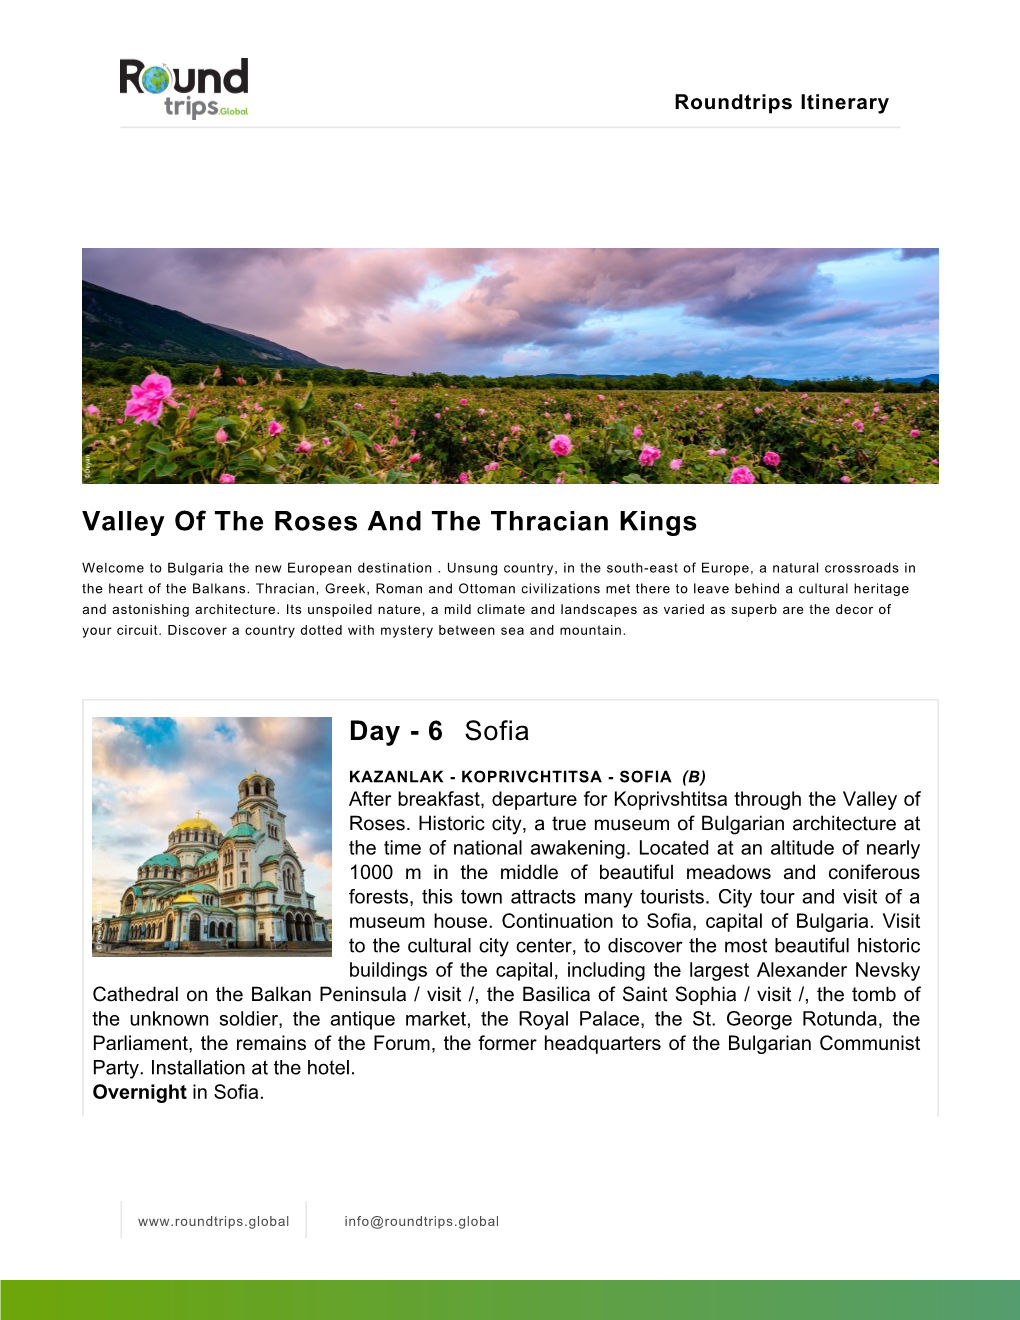 Valley of the Roses and the Thracian Kings